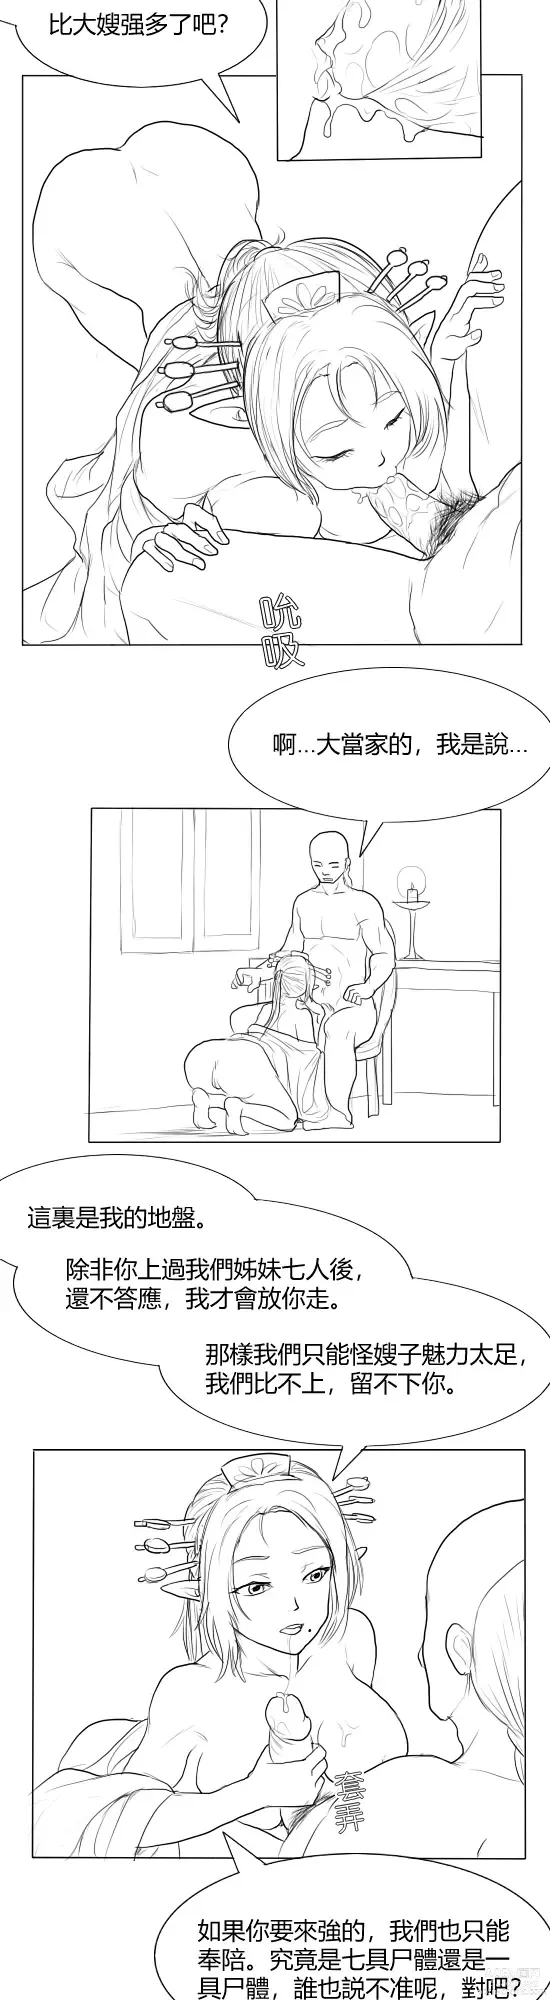 Page 18 of doujinshi 落英  第一话